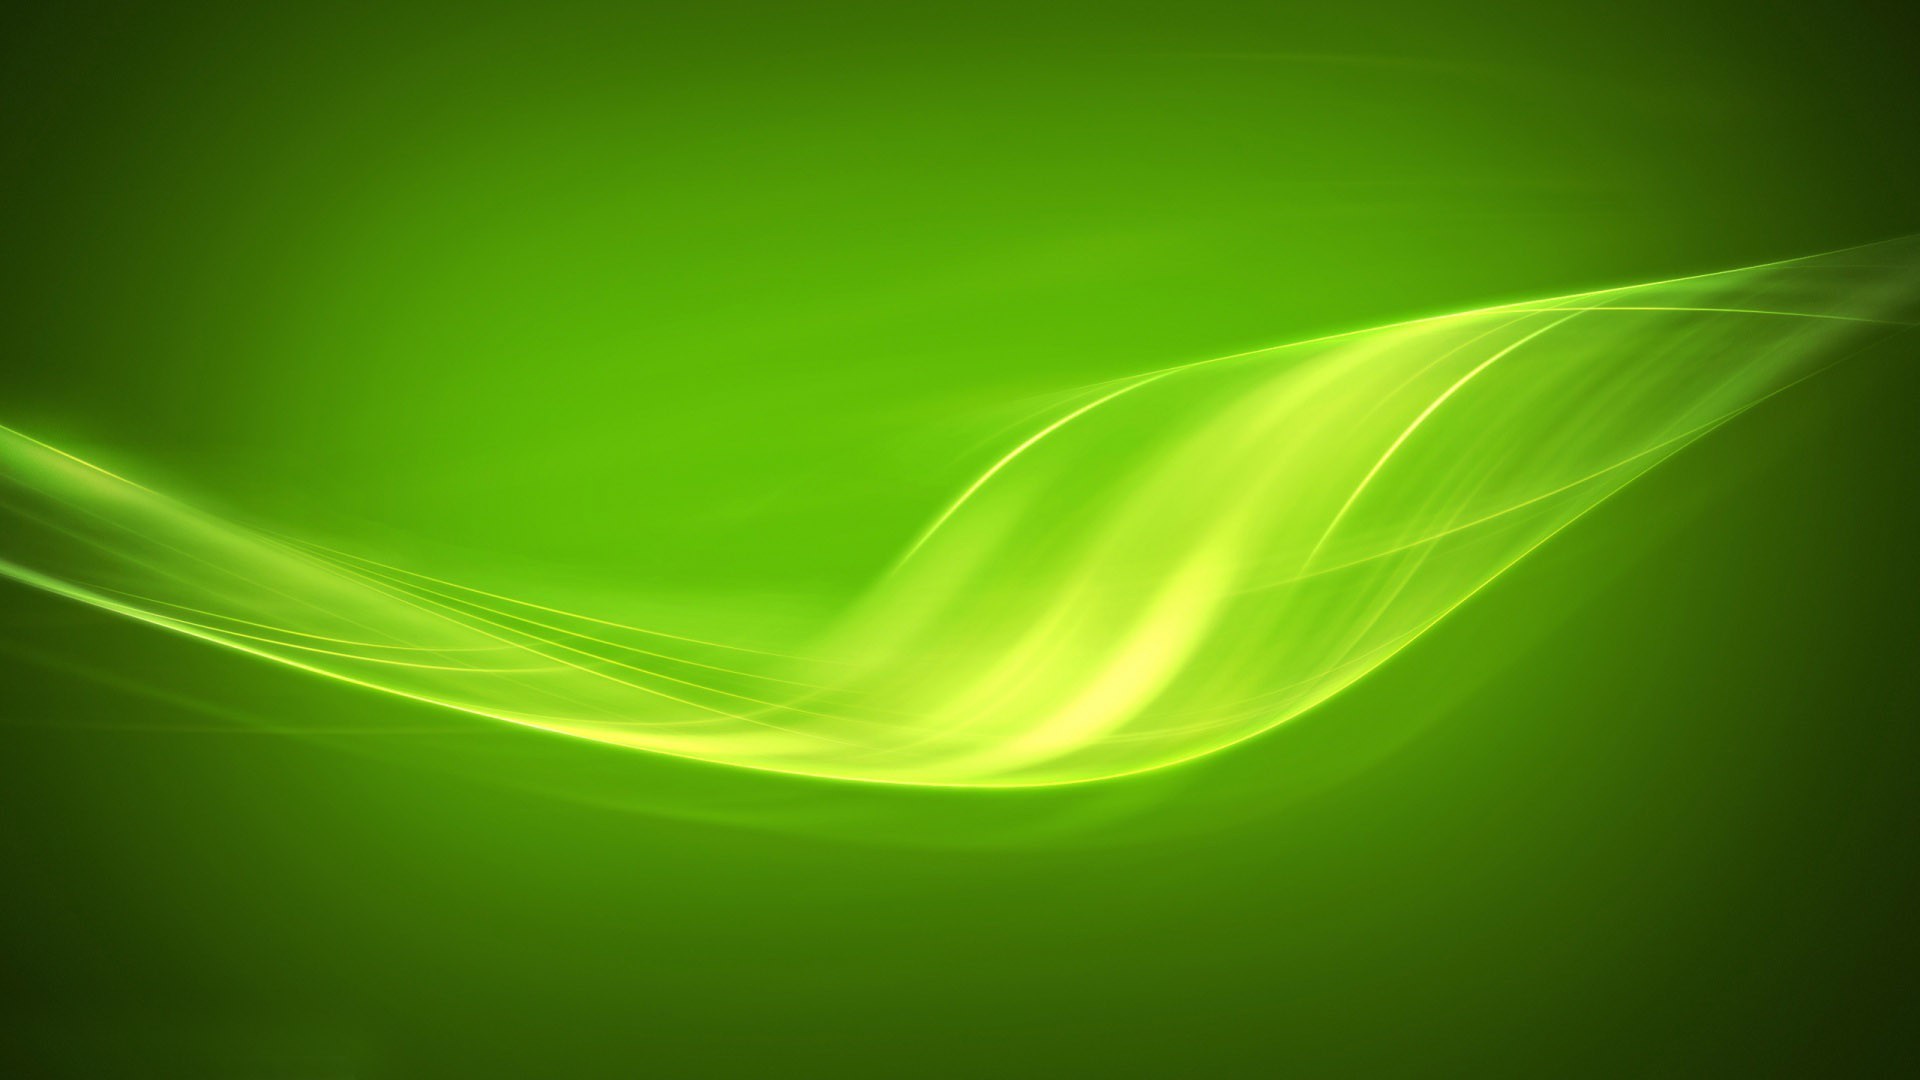 Neon Green Desktop Backgrounds With Resolution 1920X1080 pixel. You can make this wallpaper for your Desktop Computer Backgrounds, Mac Wallpapers, Android Lock screen or iPhone Screensavers